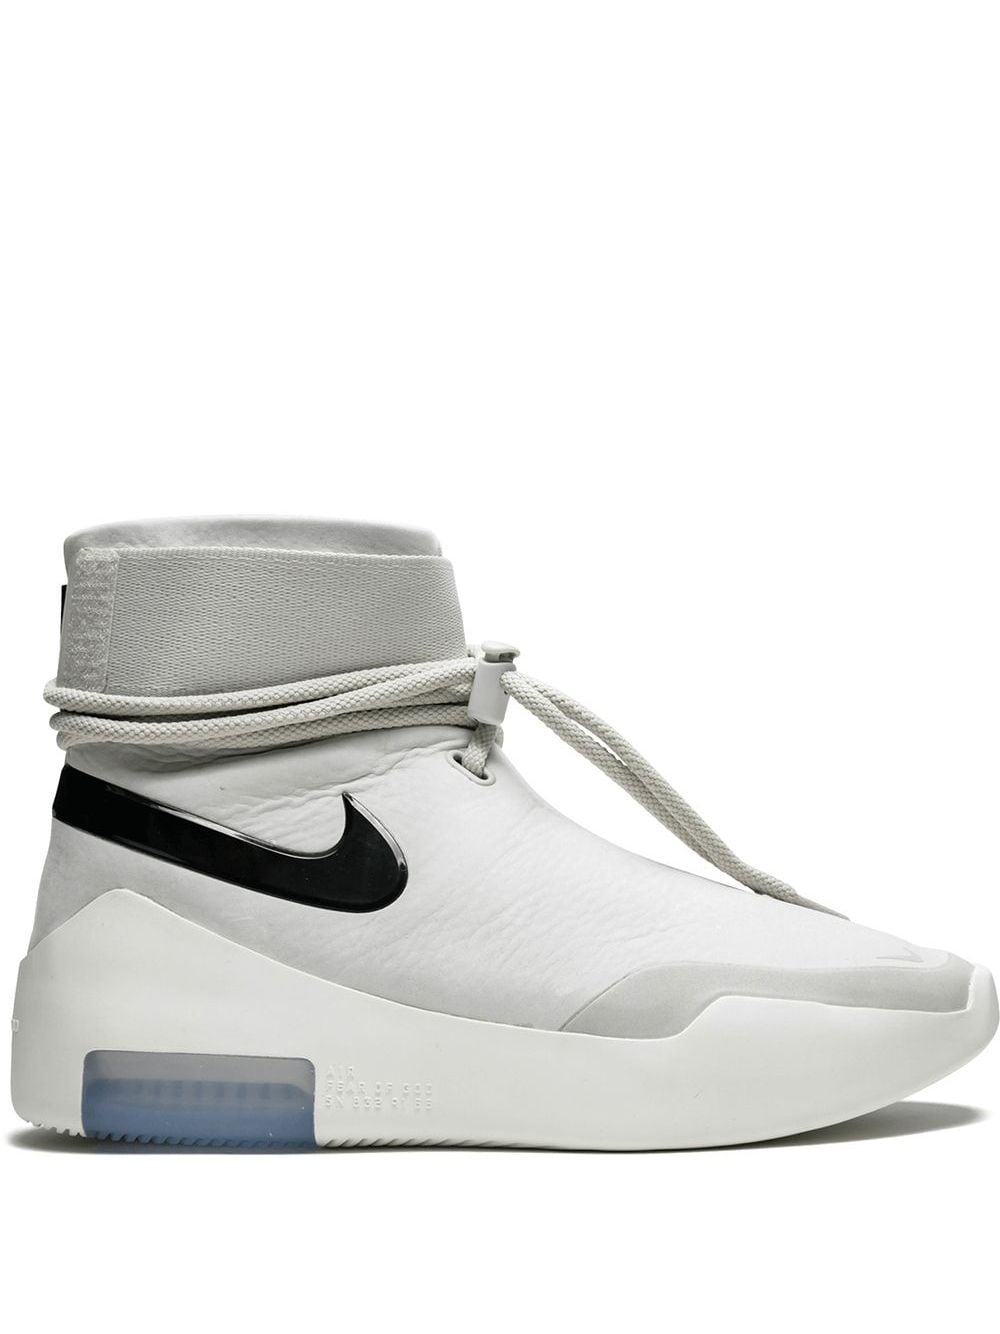 Nike x Fear of God Air Shoot Around sneakers - Grey von Nike